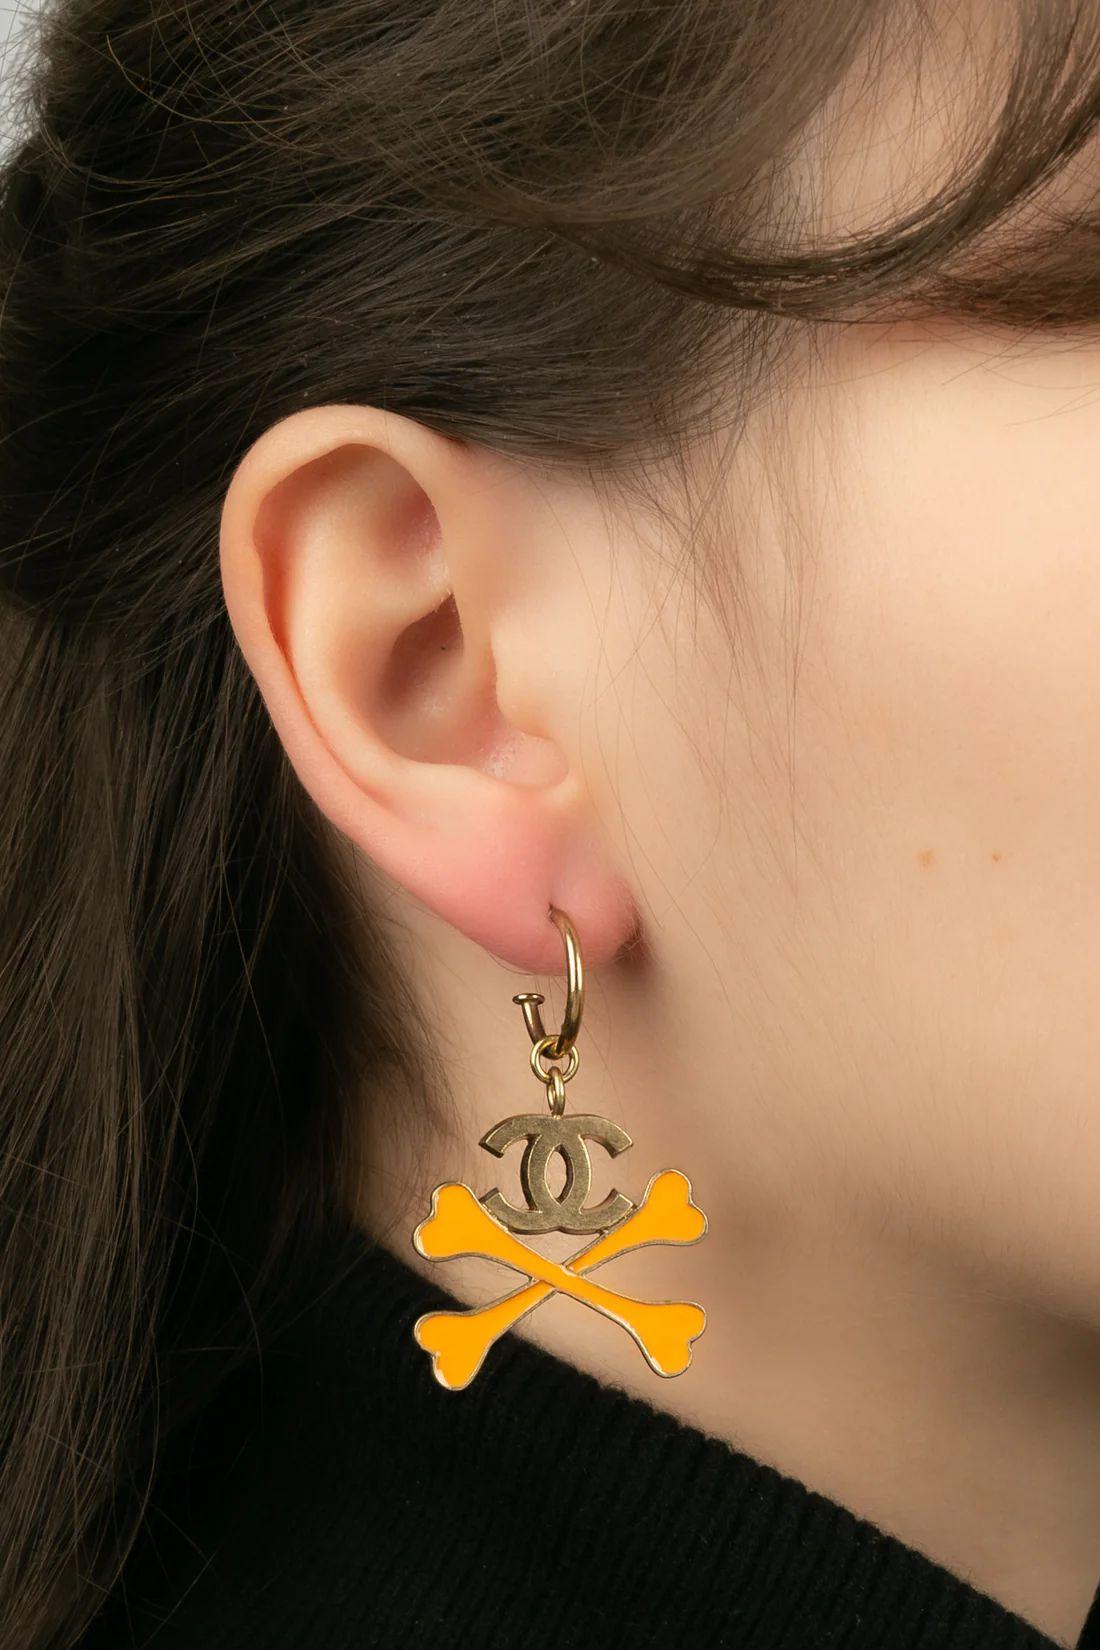 Chanel - (Made in France) Earrings in gold metal with orange enamel. Cruise Collection 2003.

Additional information:
Dimensions: 4.5 H cm
Condition: Very good condition
Seller Ref number: BOB245